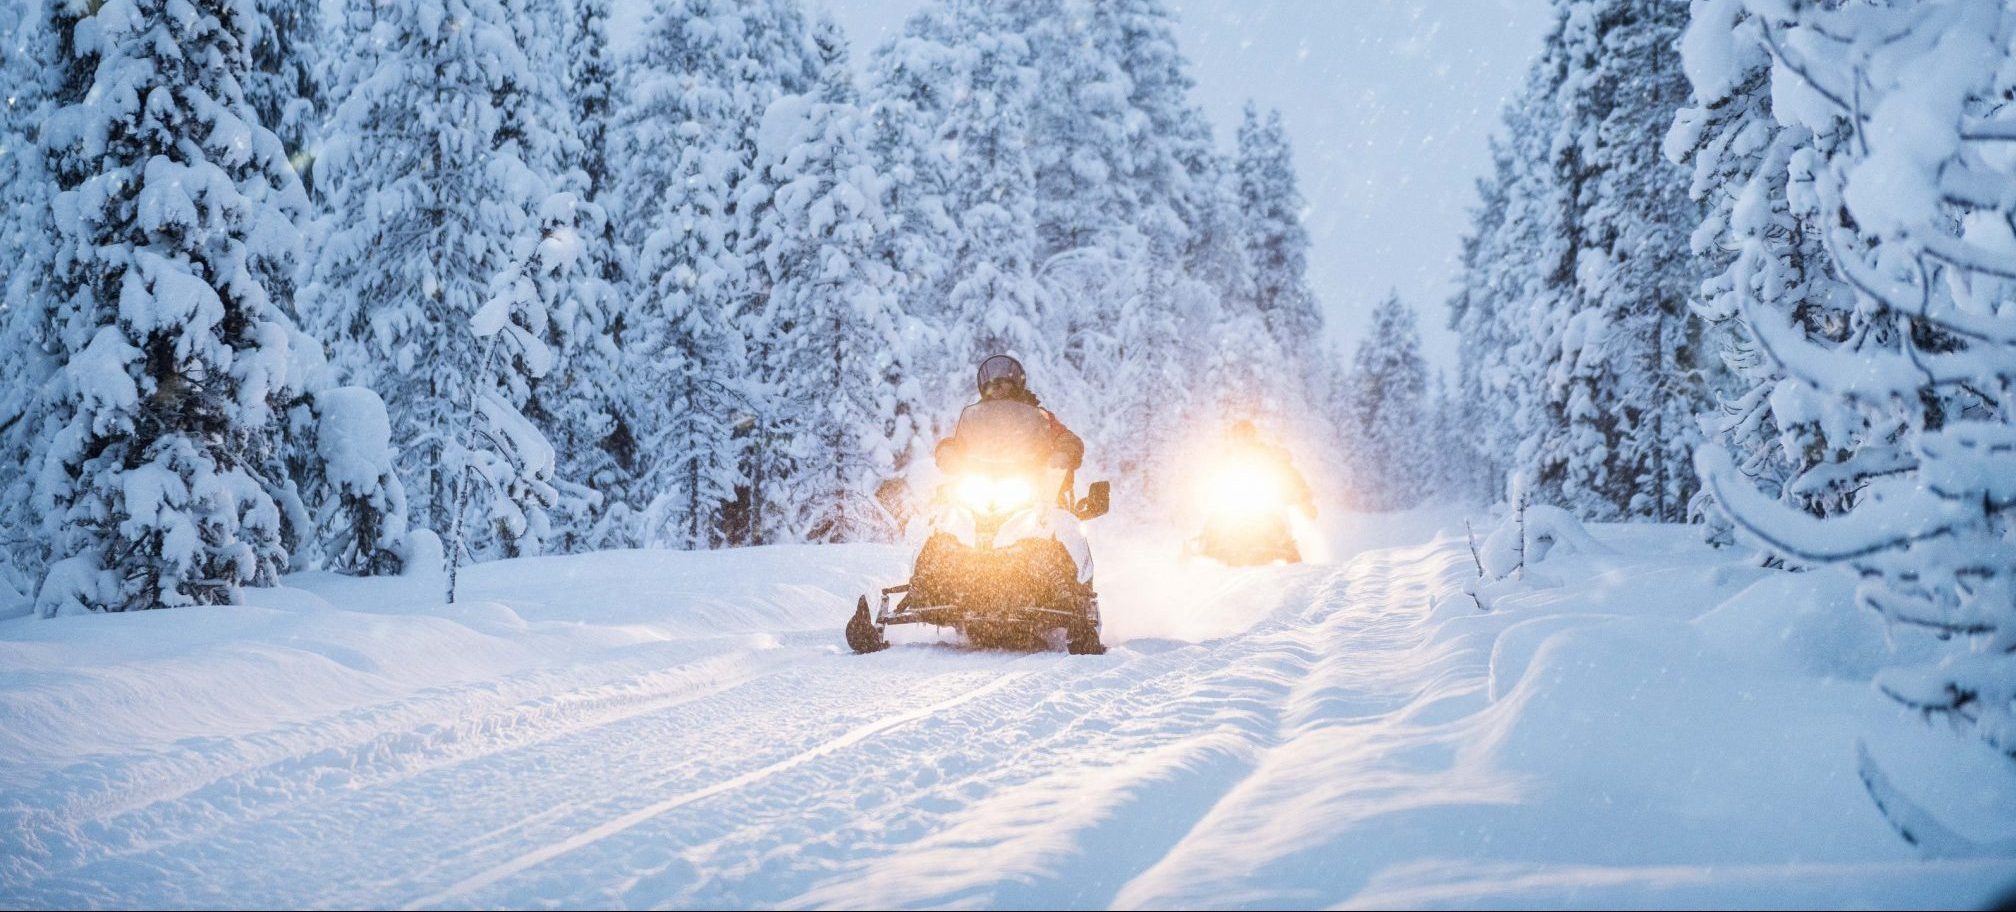 Sneeuwscooter tocht Lapland